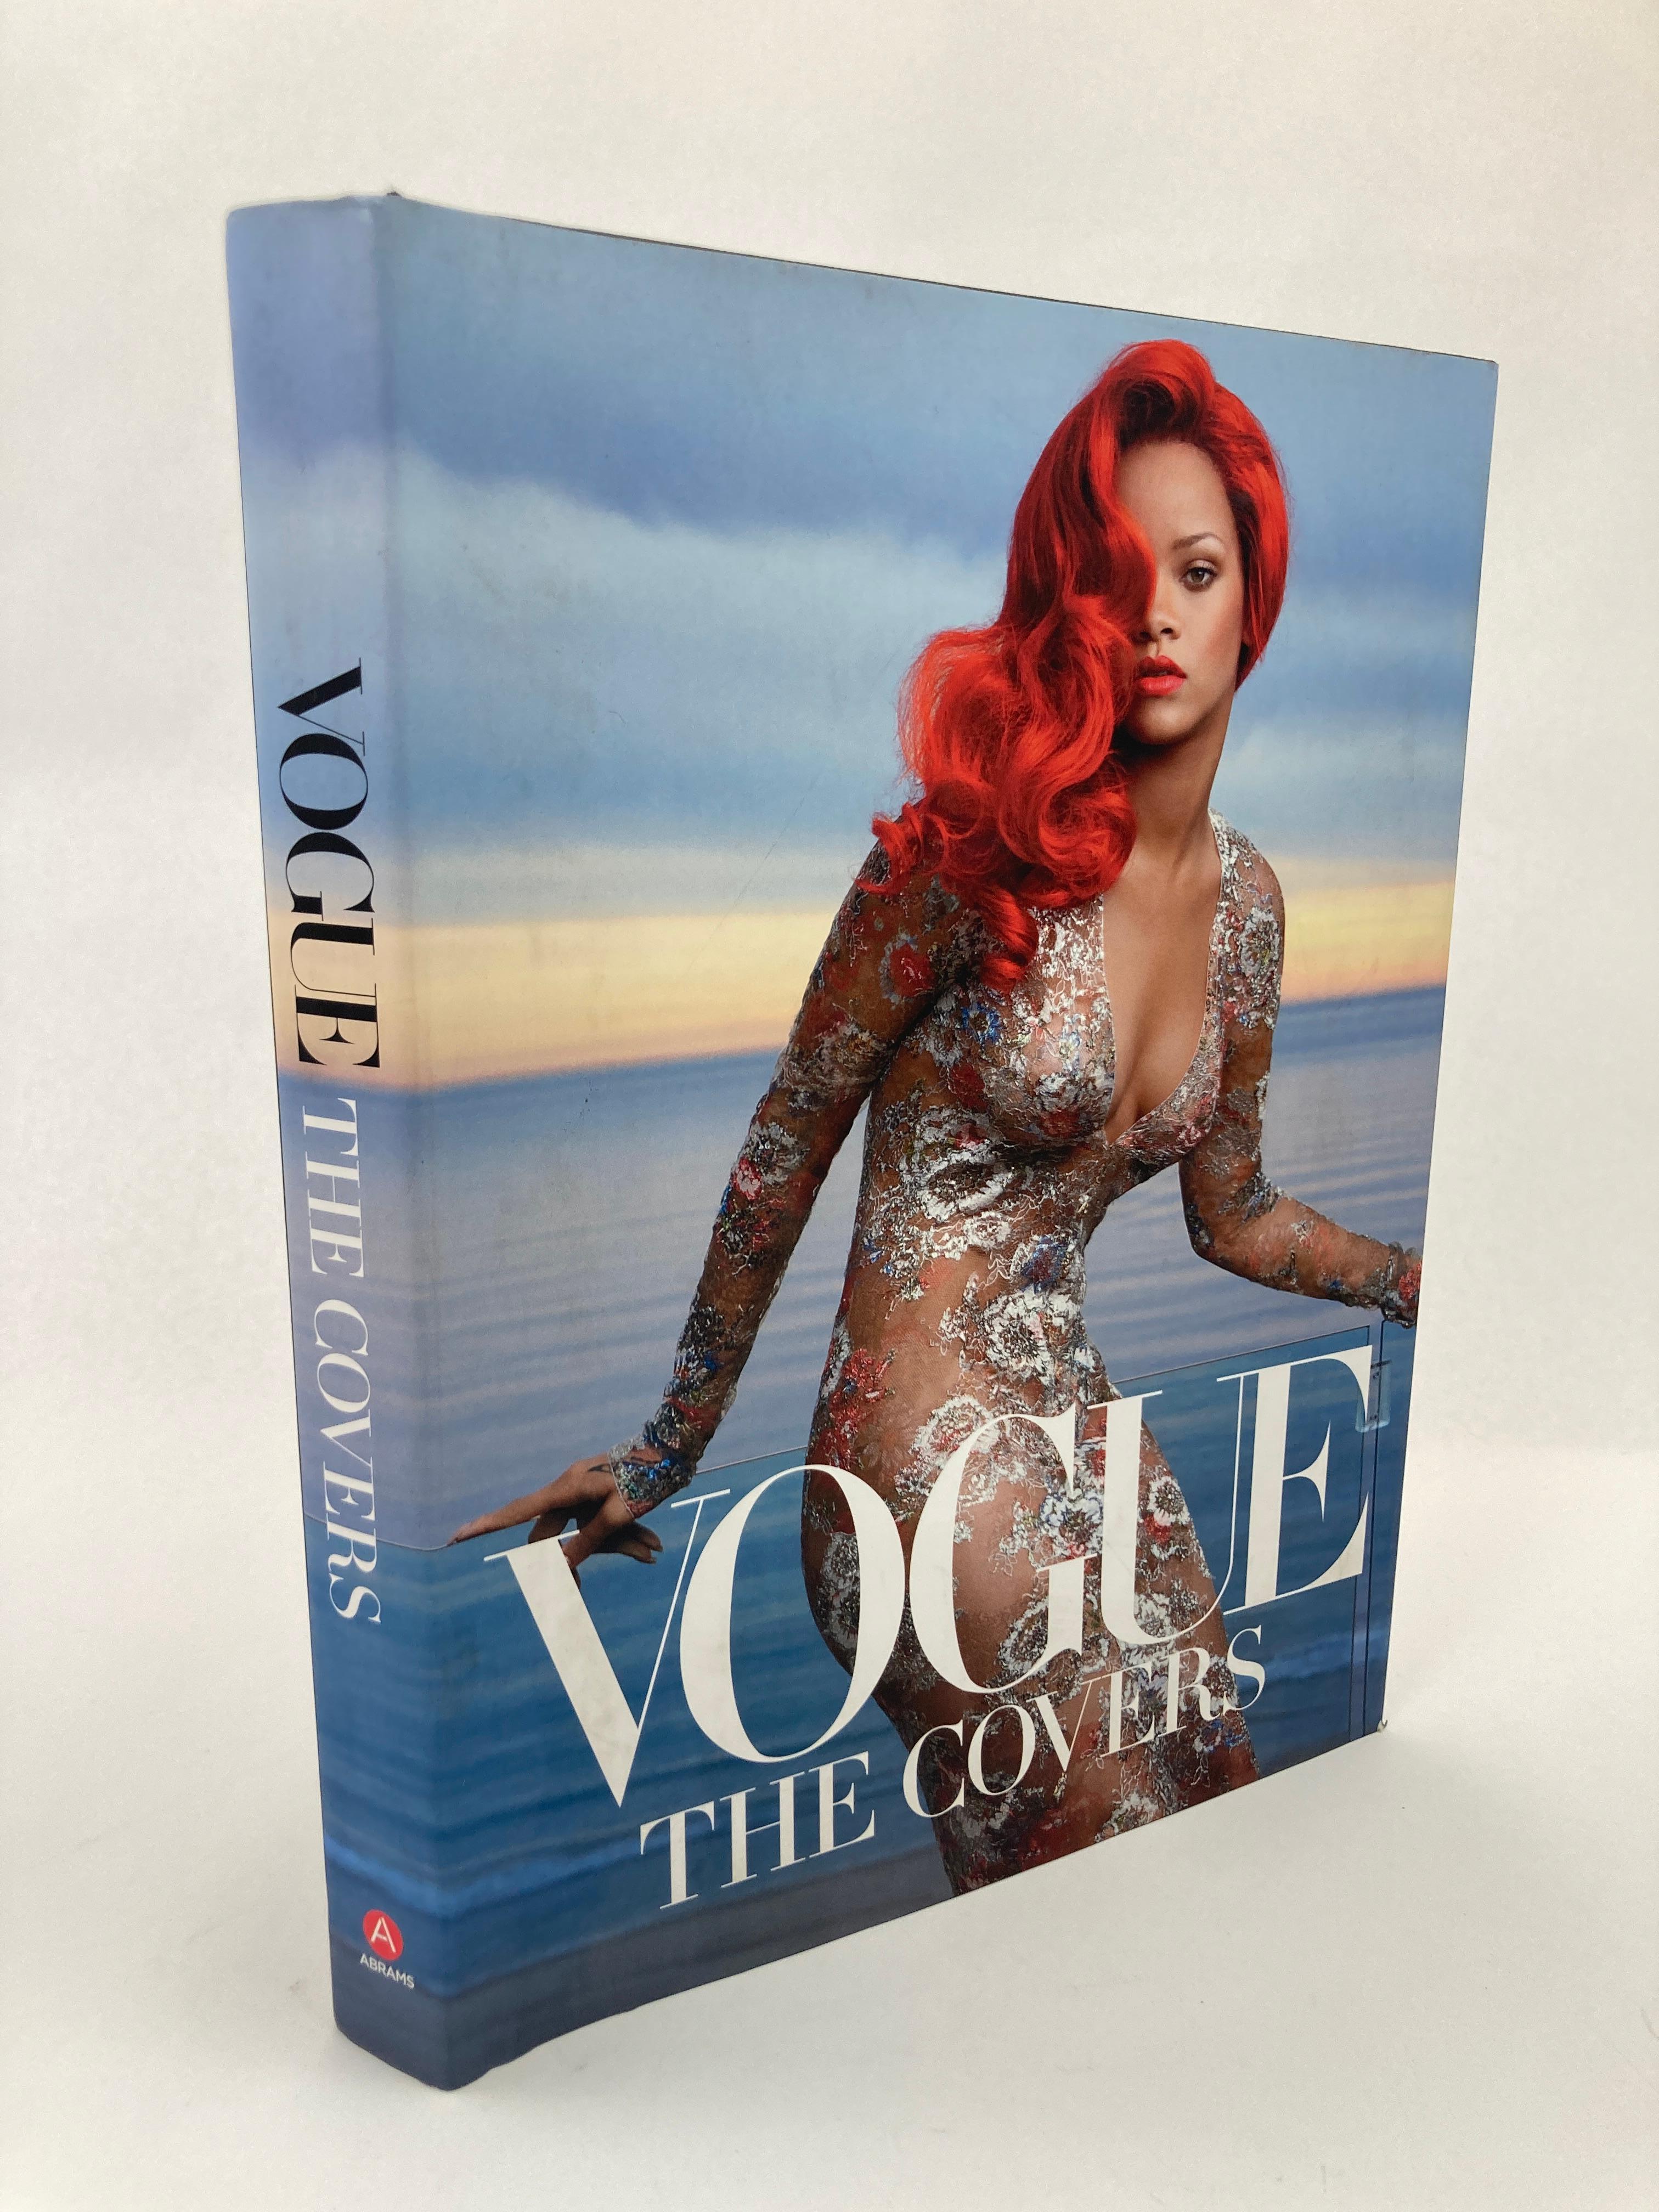 Vogue The Covers, Hardcover-Couchtischbuch im Angebot 1